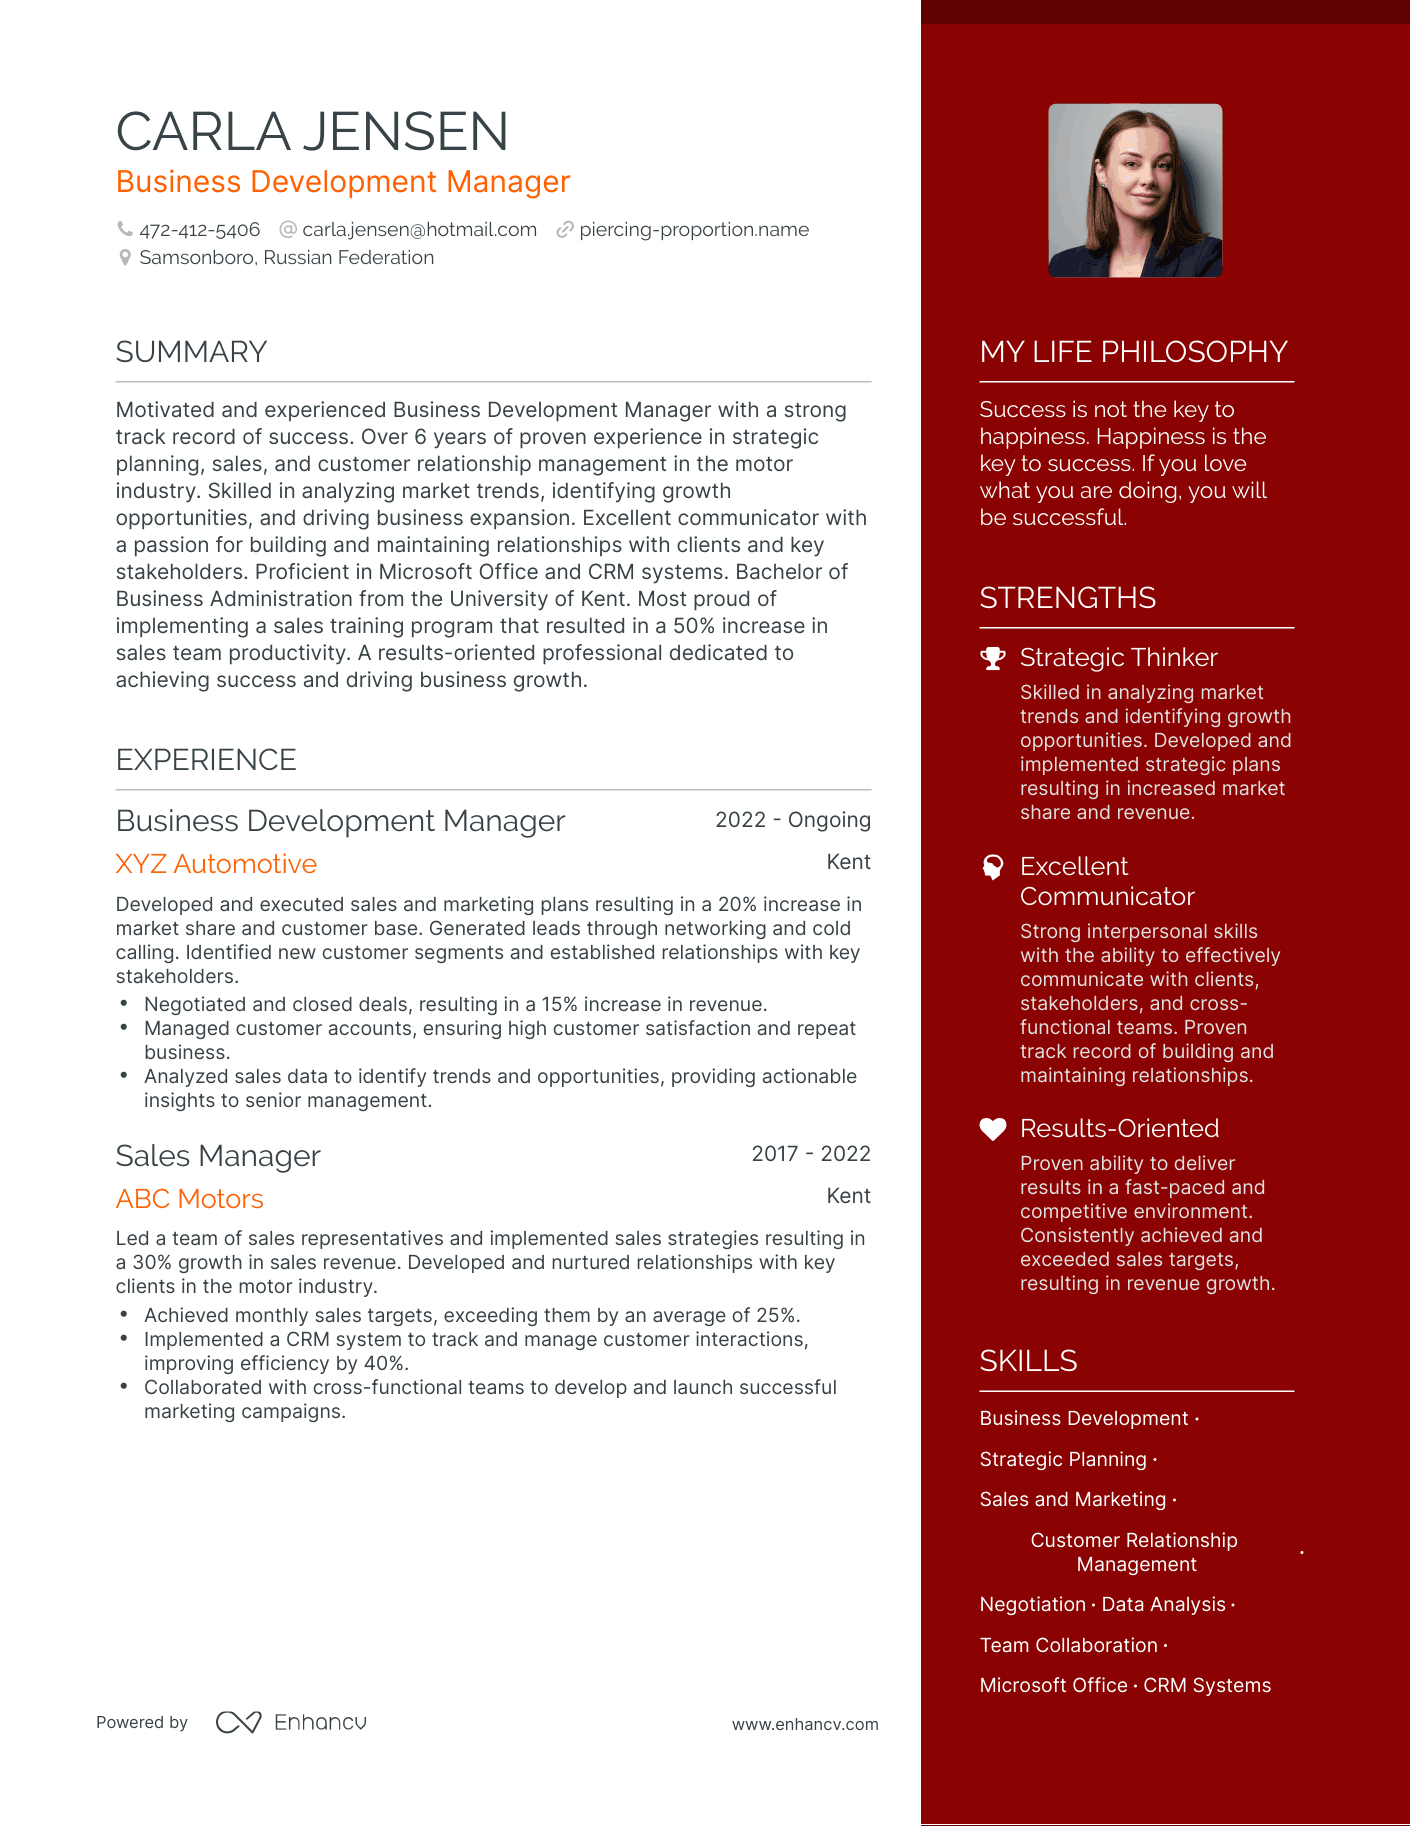 Business Development Manager resume example